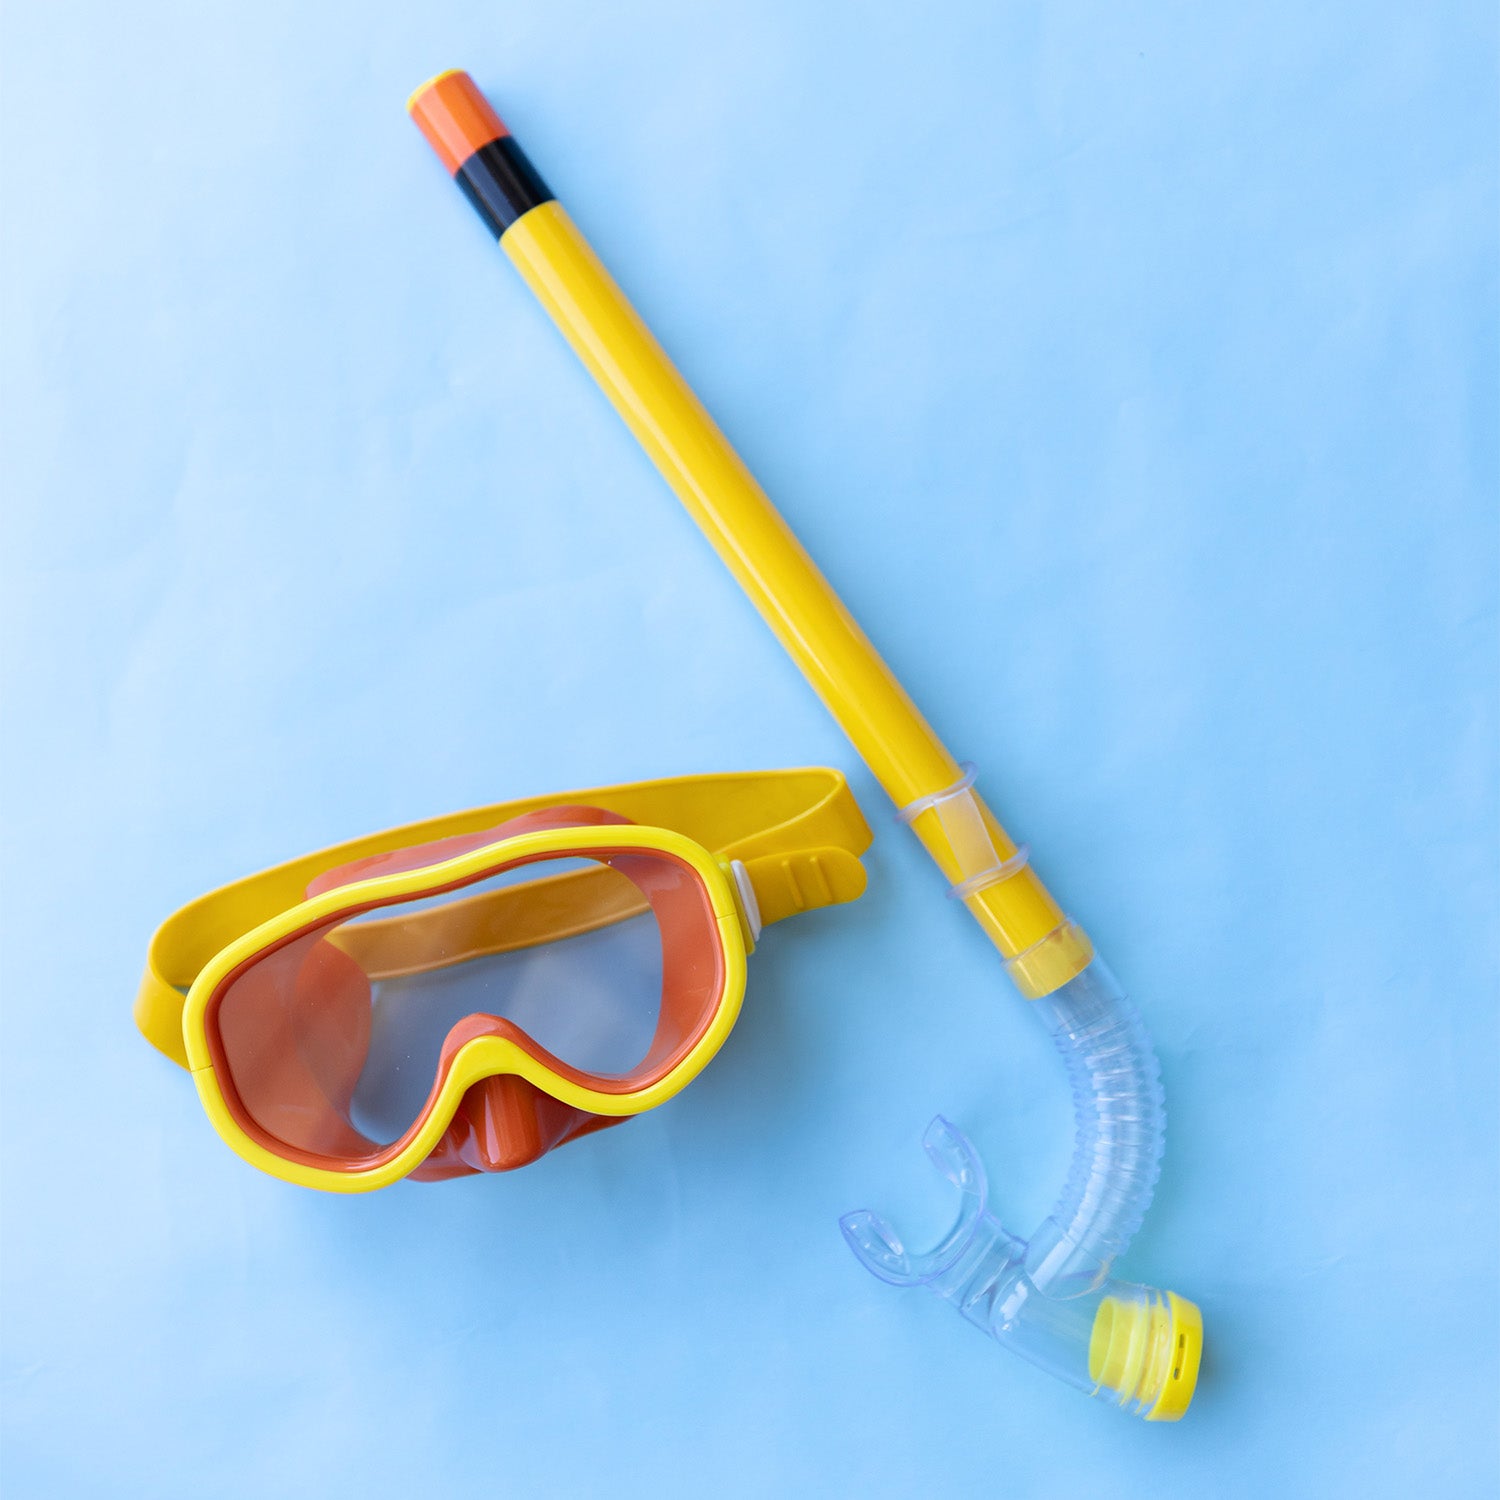 A yellow kids snorkel set including a mask, mouthpiece, and snorkel.